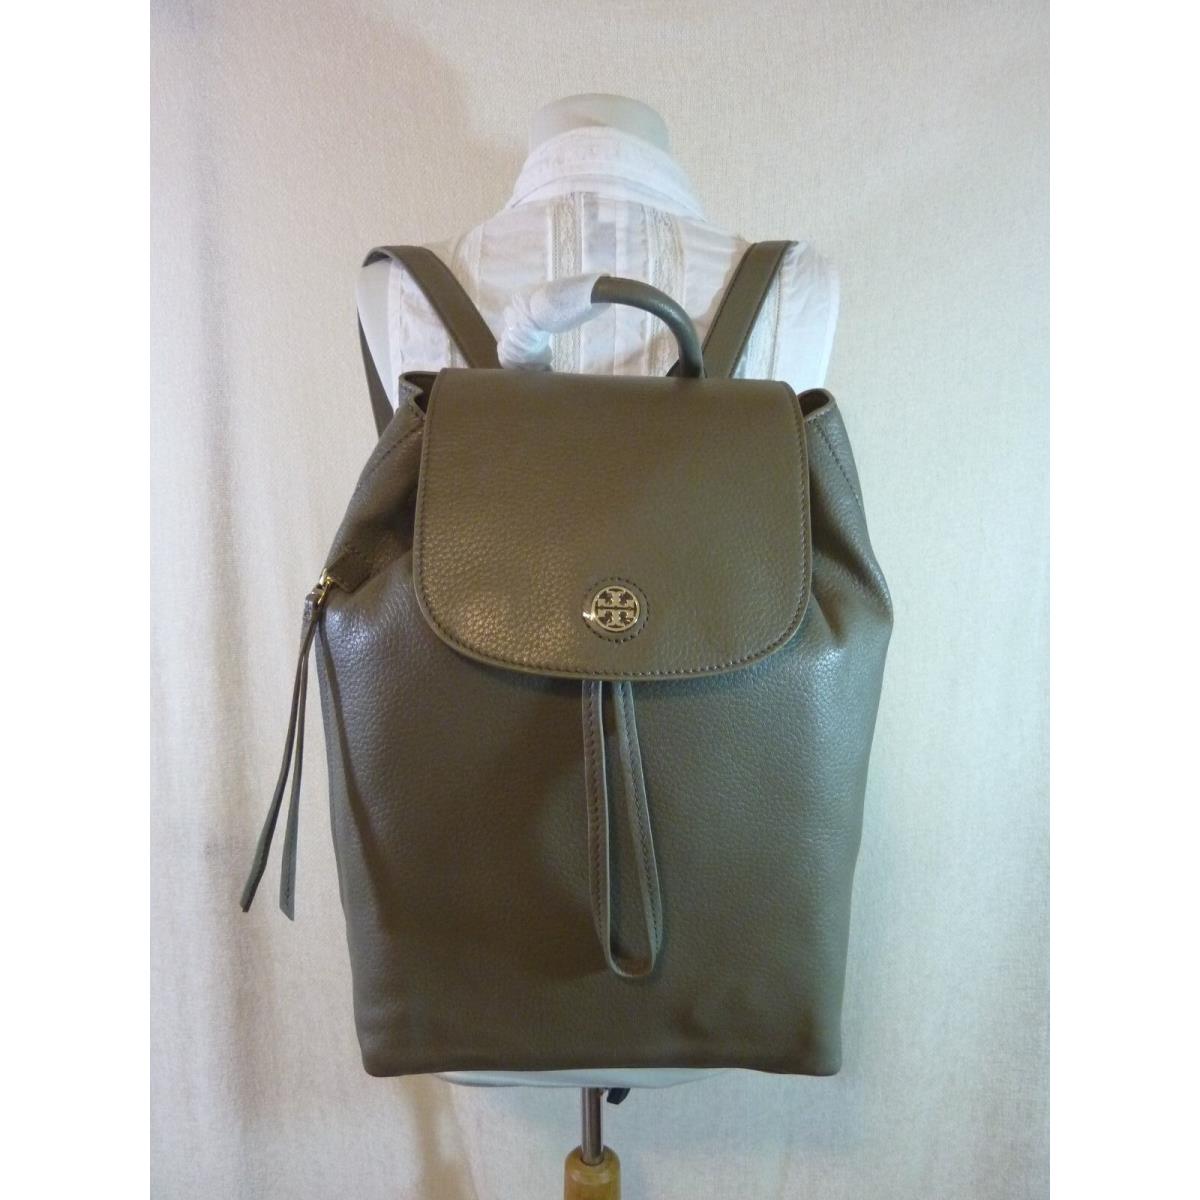 Tory Burch Porcini Gray Leather Brody Large Backpack